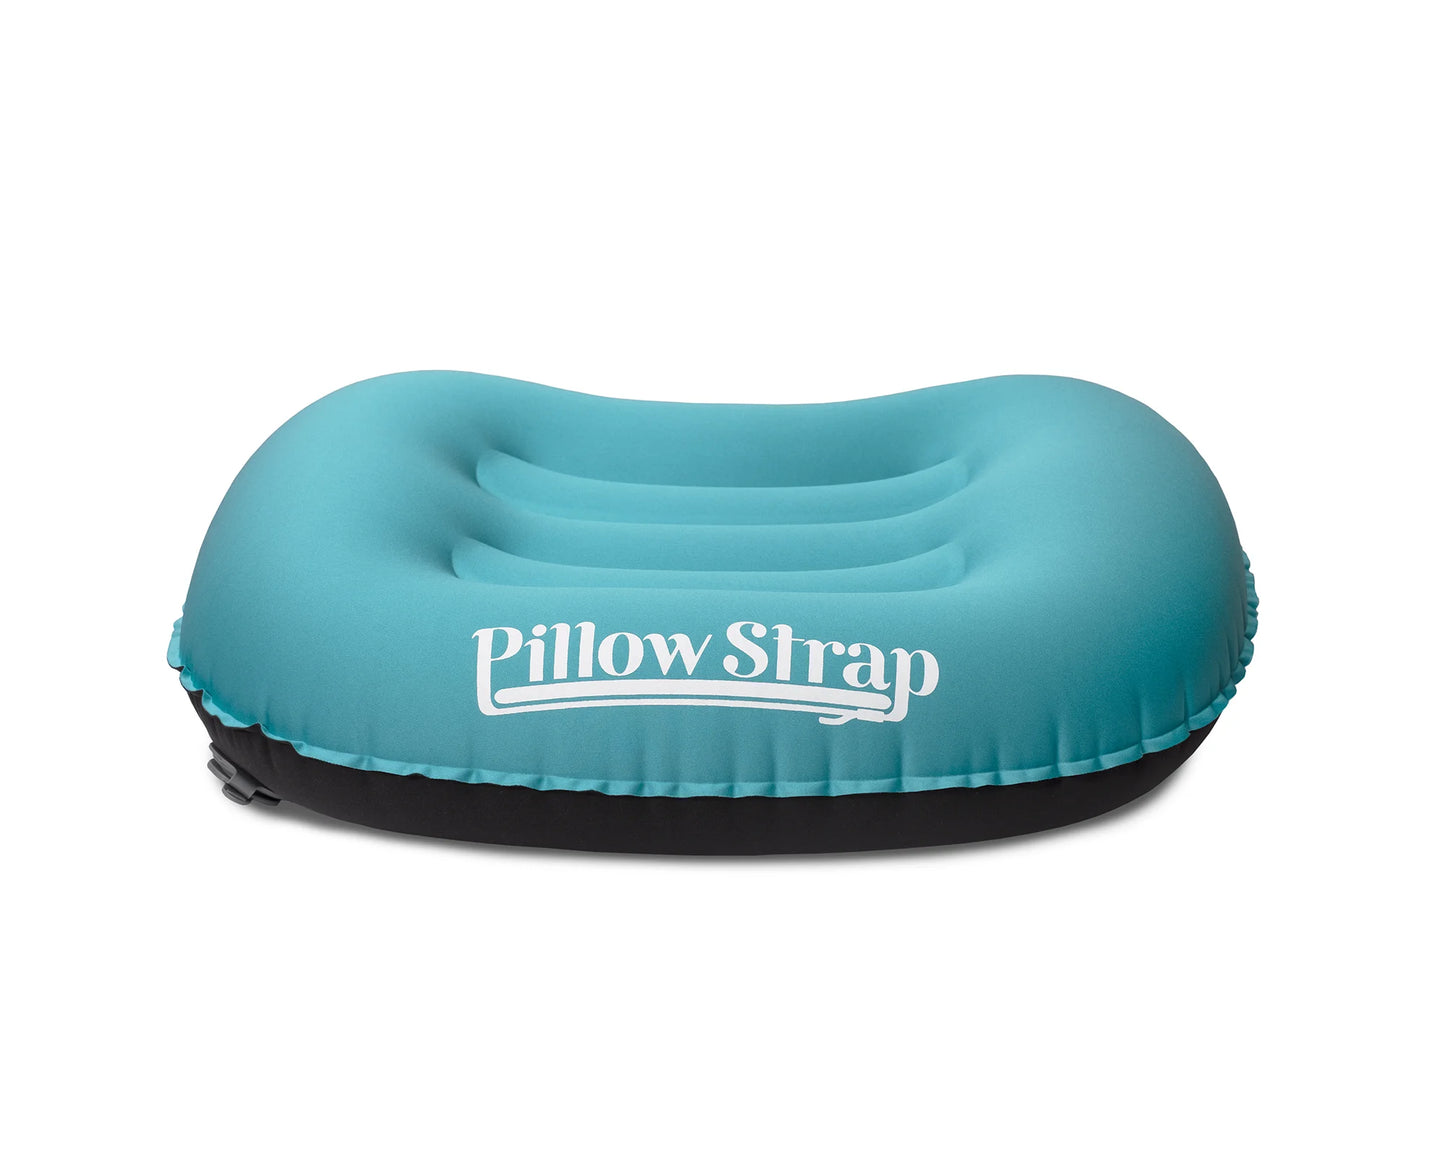 The Camp Pillow, lightweight inflatable camping and backpacking pillow. Top View.